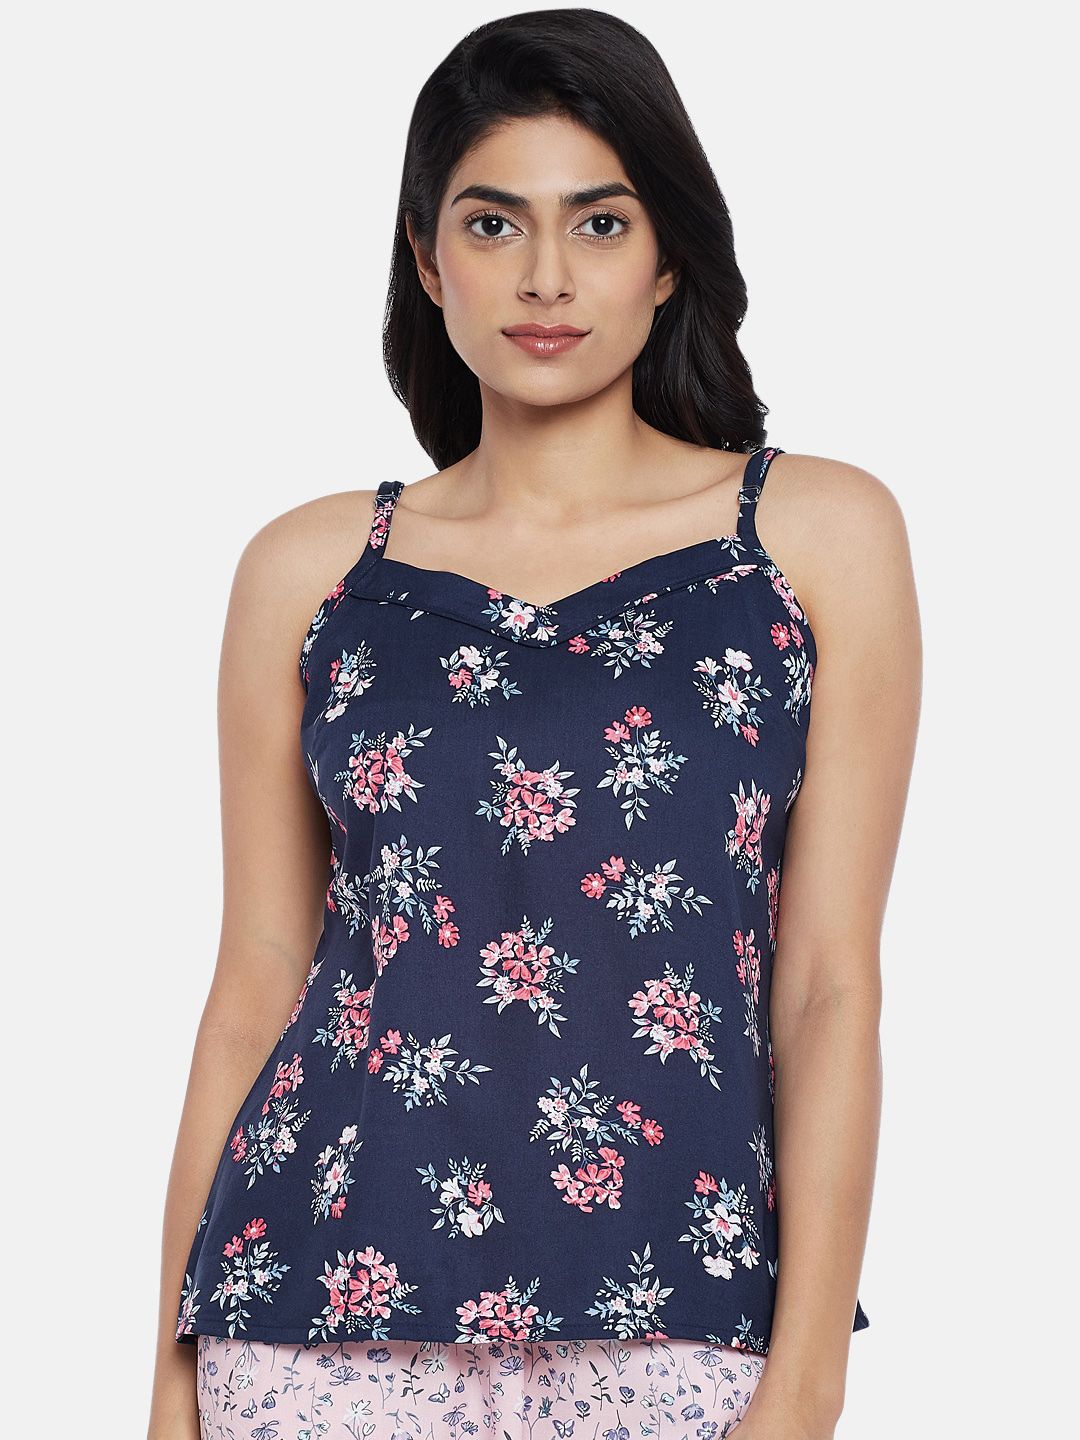 Dreamz by Pantaloons Navy Blue Floral Printed Regular Lounge tshirt Price in India